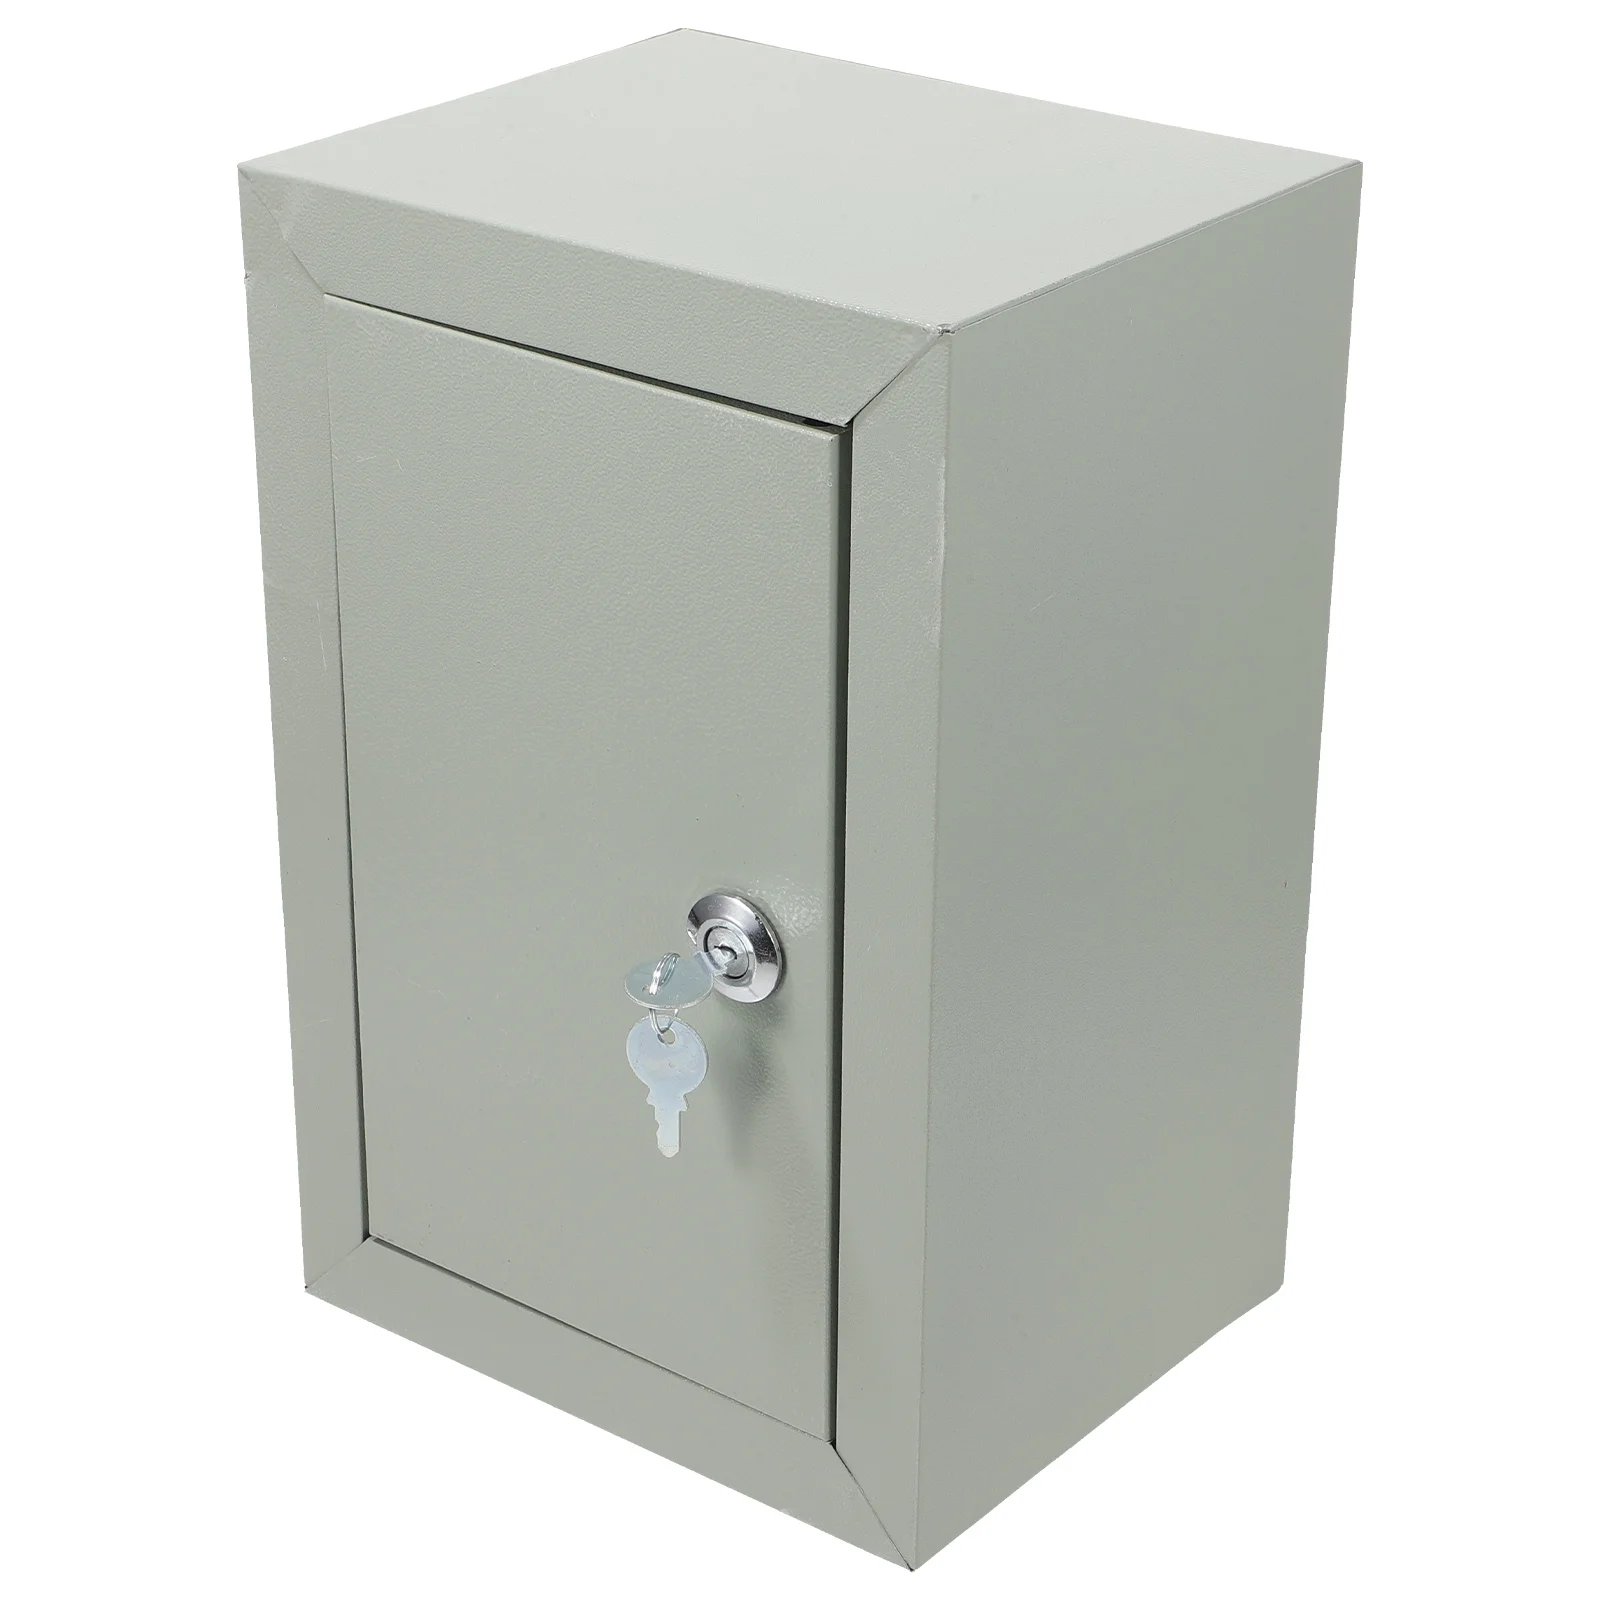 

Waterproof Electrical Box Weather Boxes Weatherproof Outdoor Enclosure for Outdoors